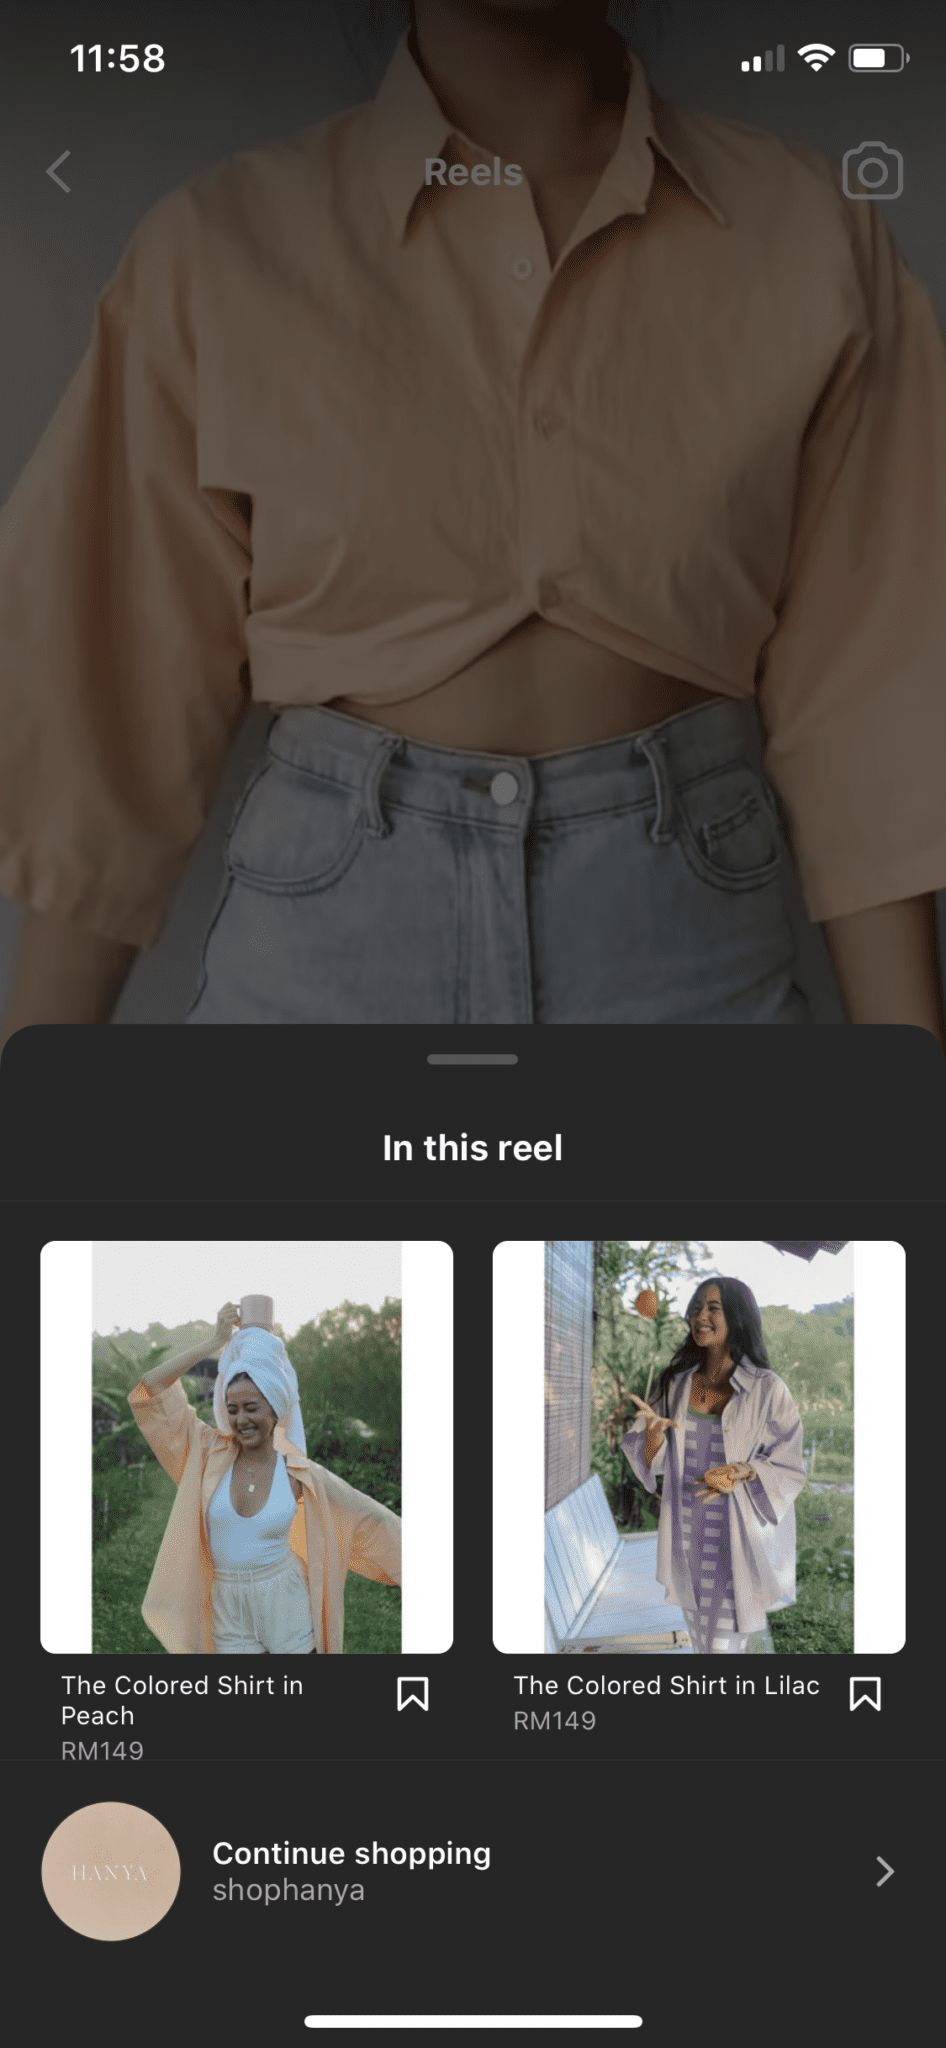 Instagram shopping product tag in reel